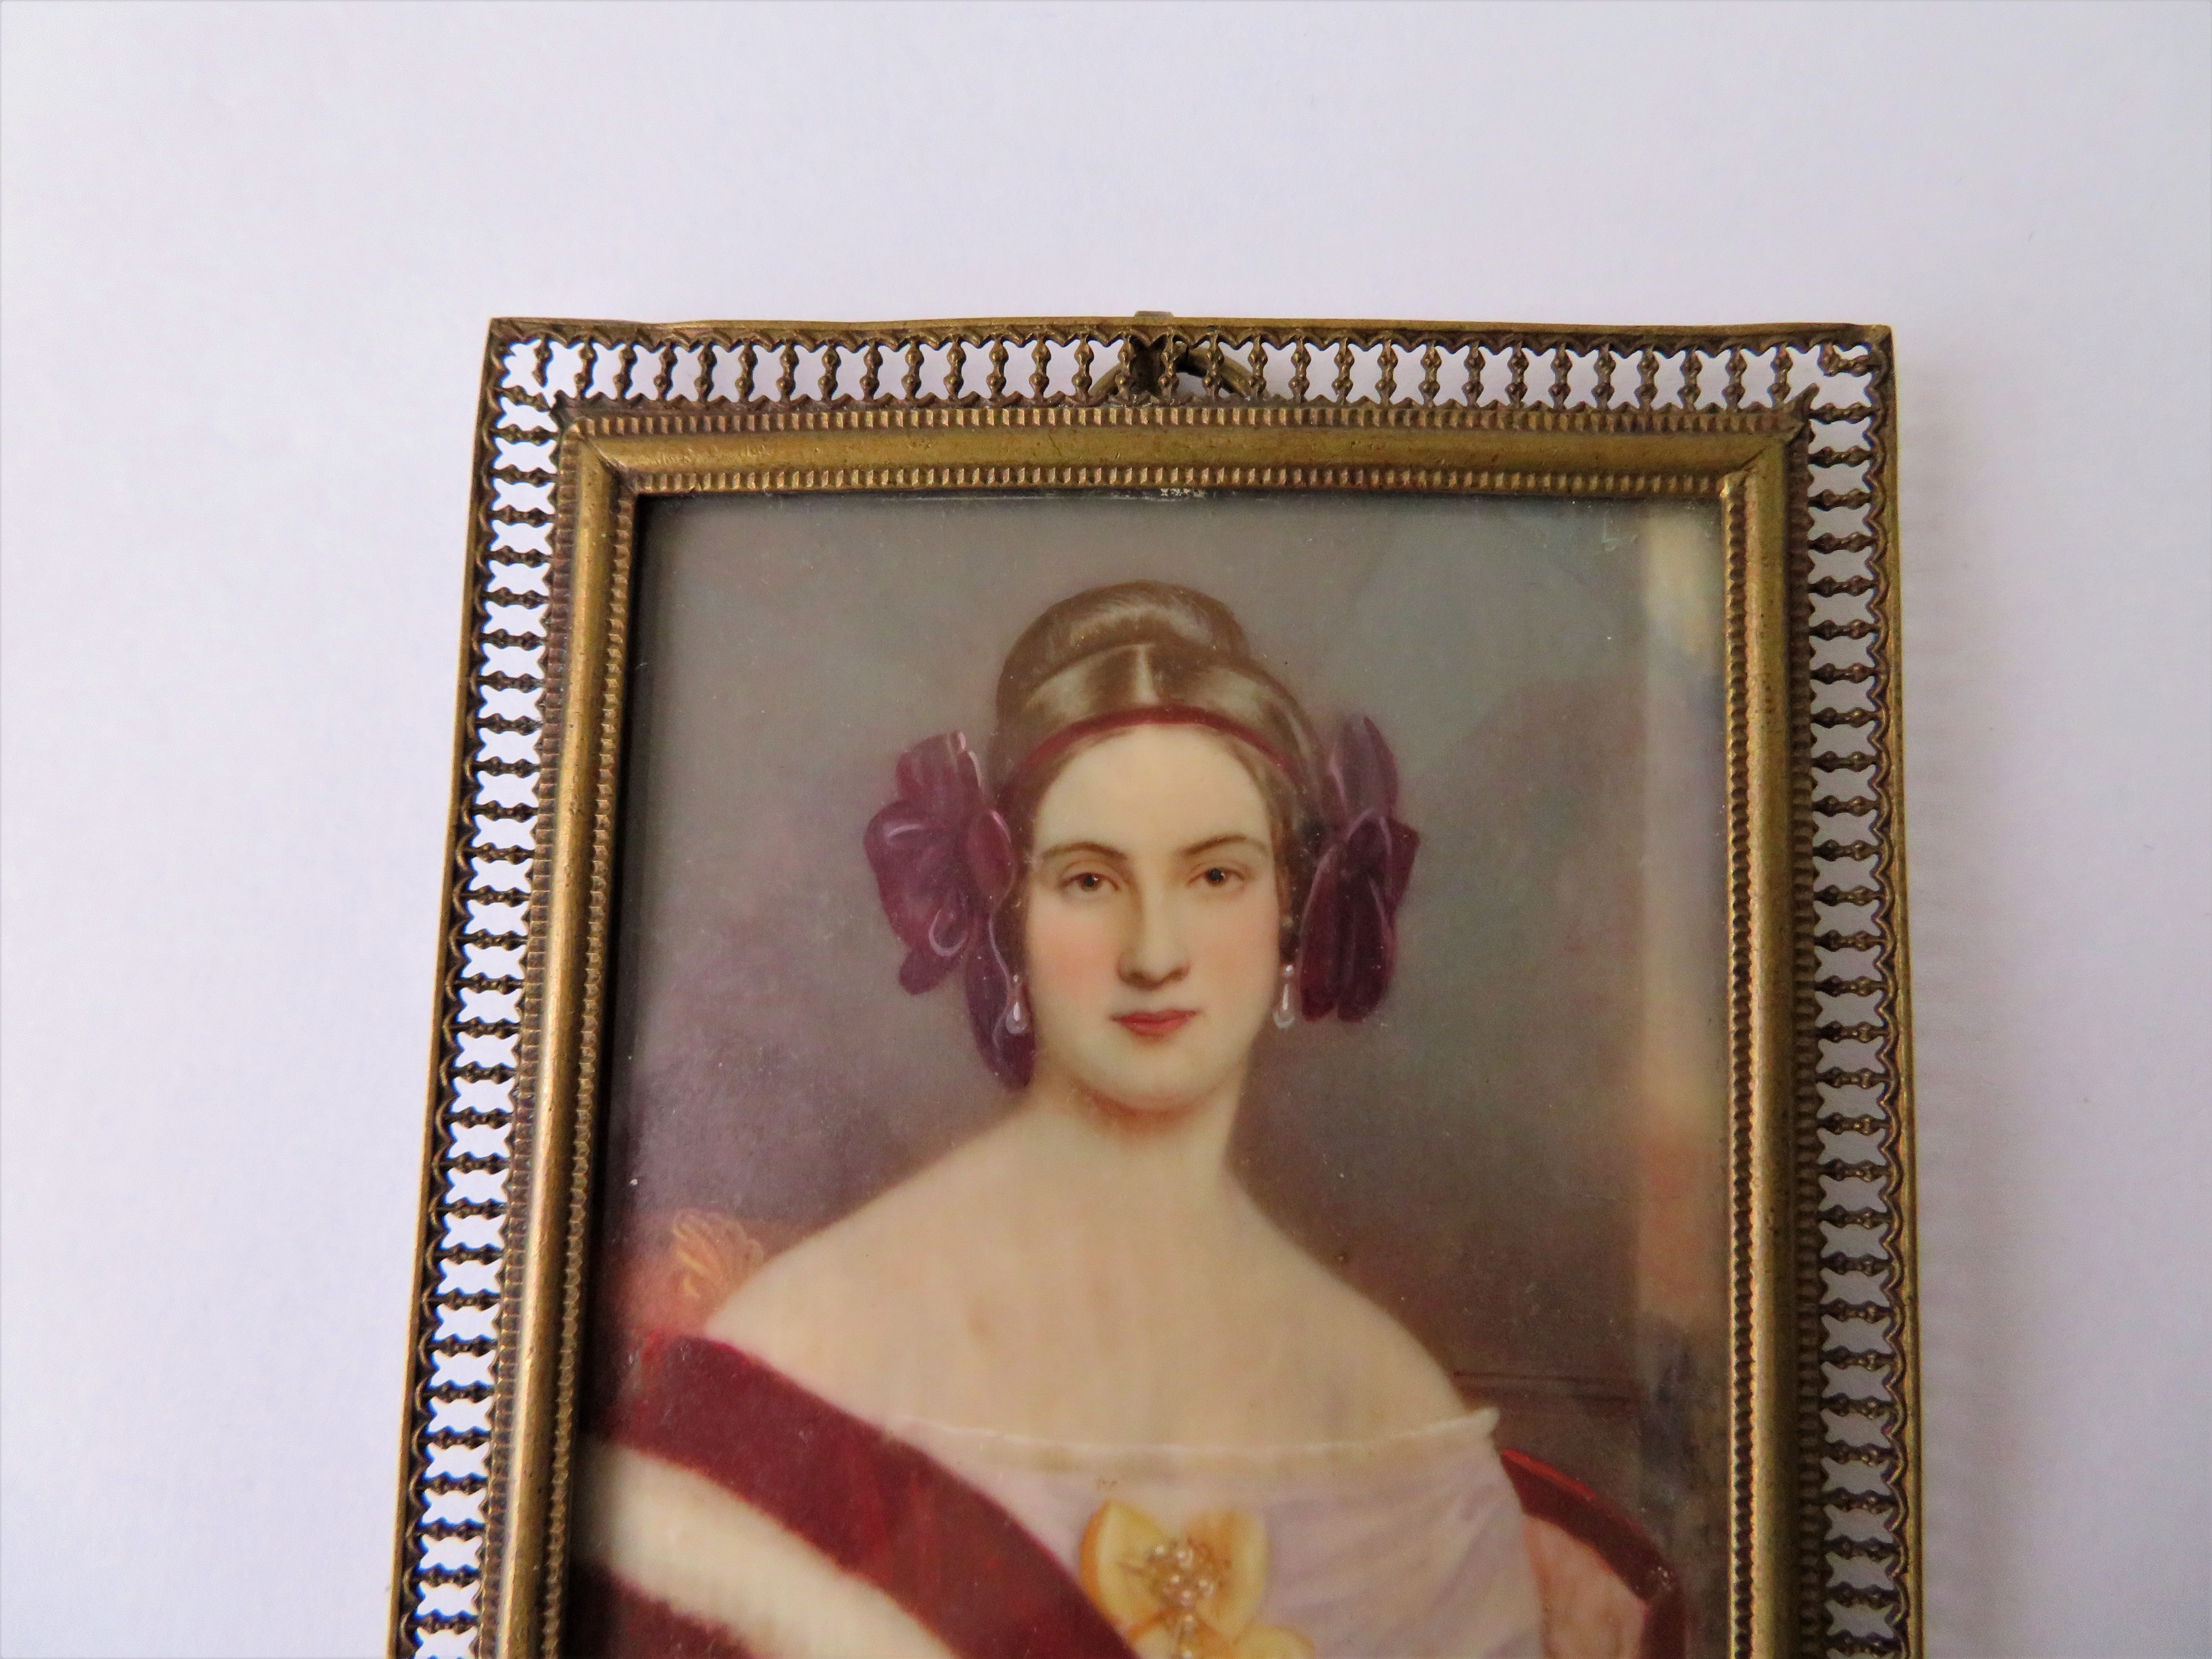 2 x Antique Hand Painted Portrait Miniatures incl frame approx Lady 76mmx 65mm - Gent 80mm x 67mm - Image 3 of 4